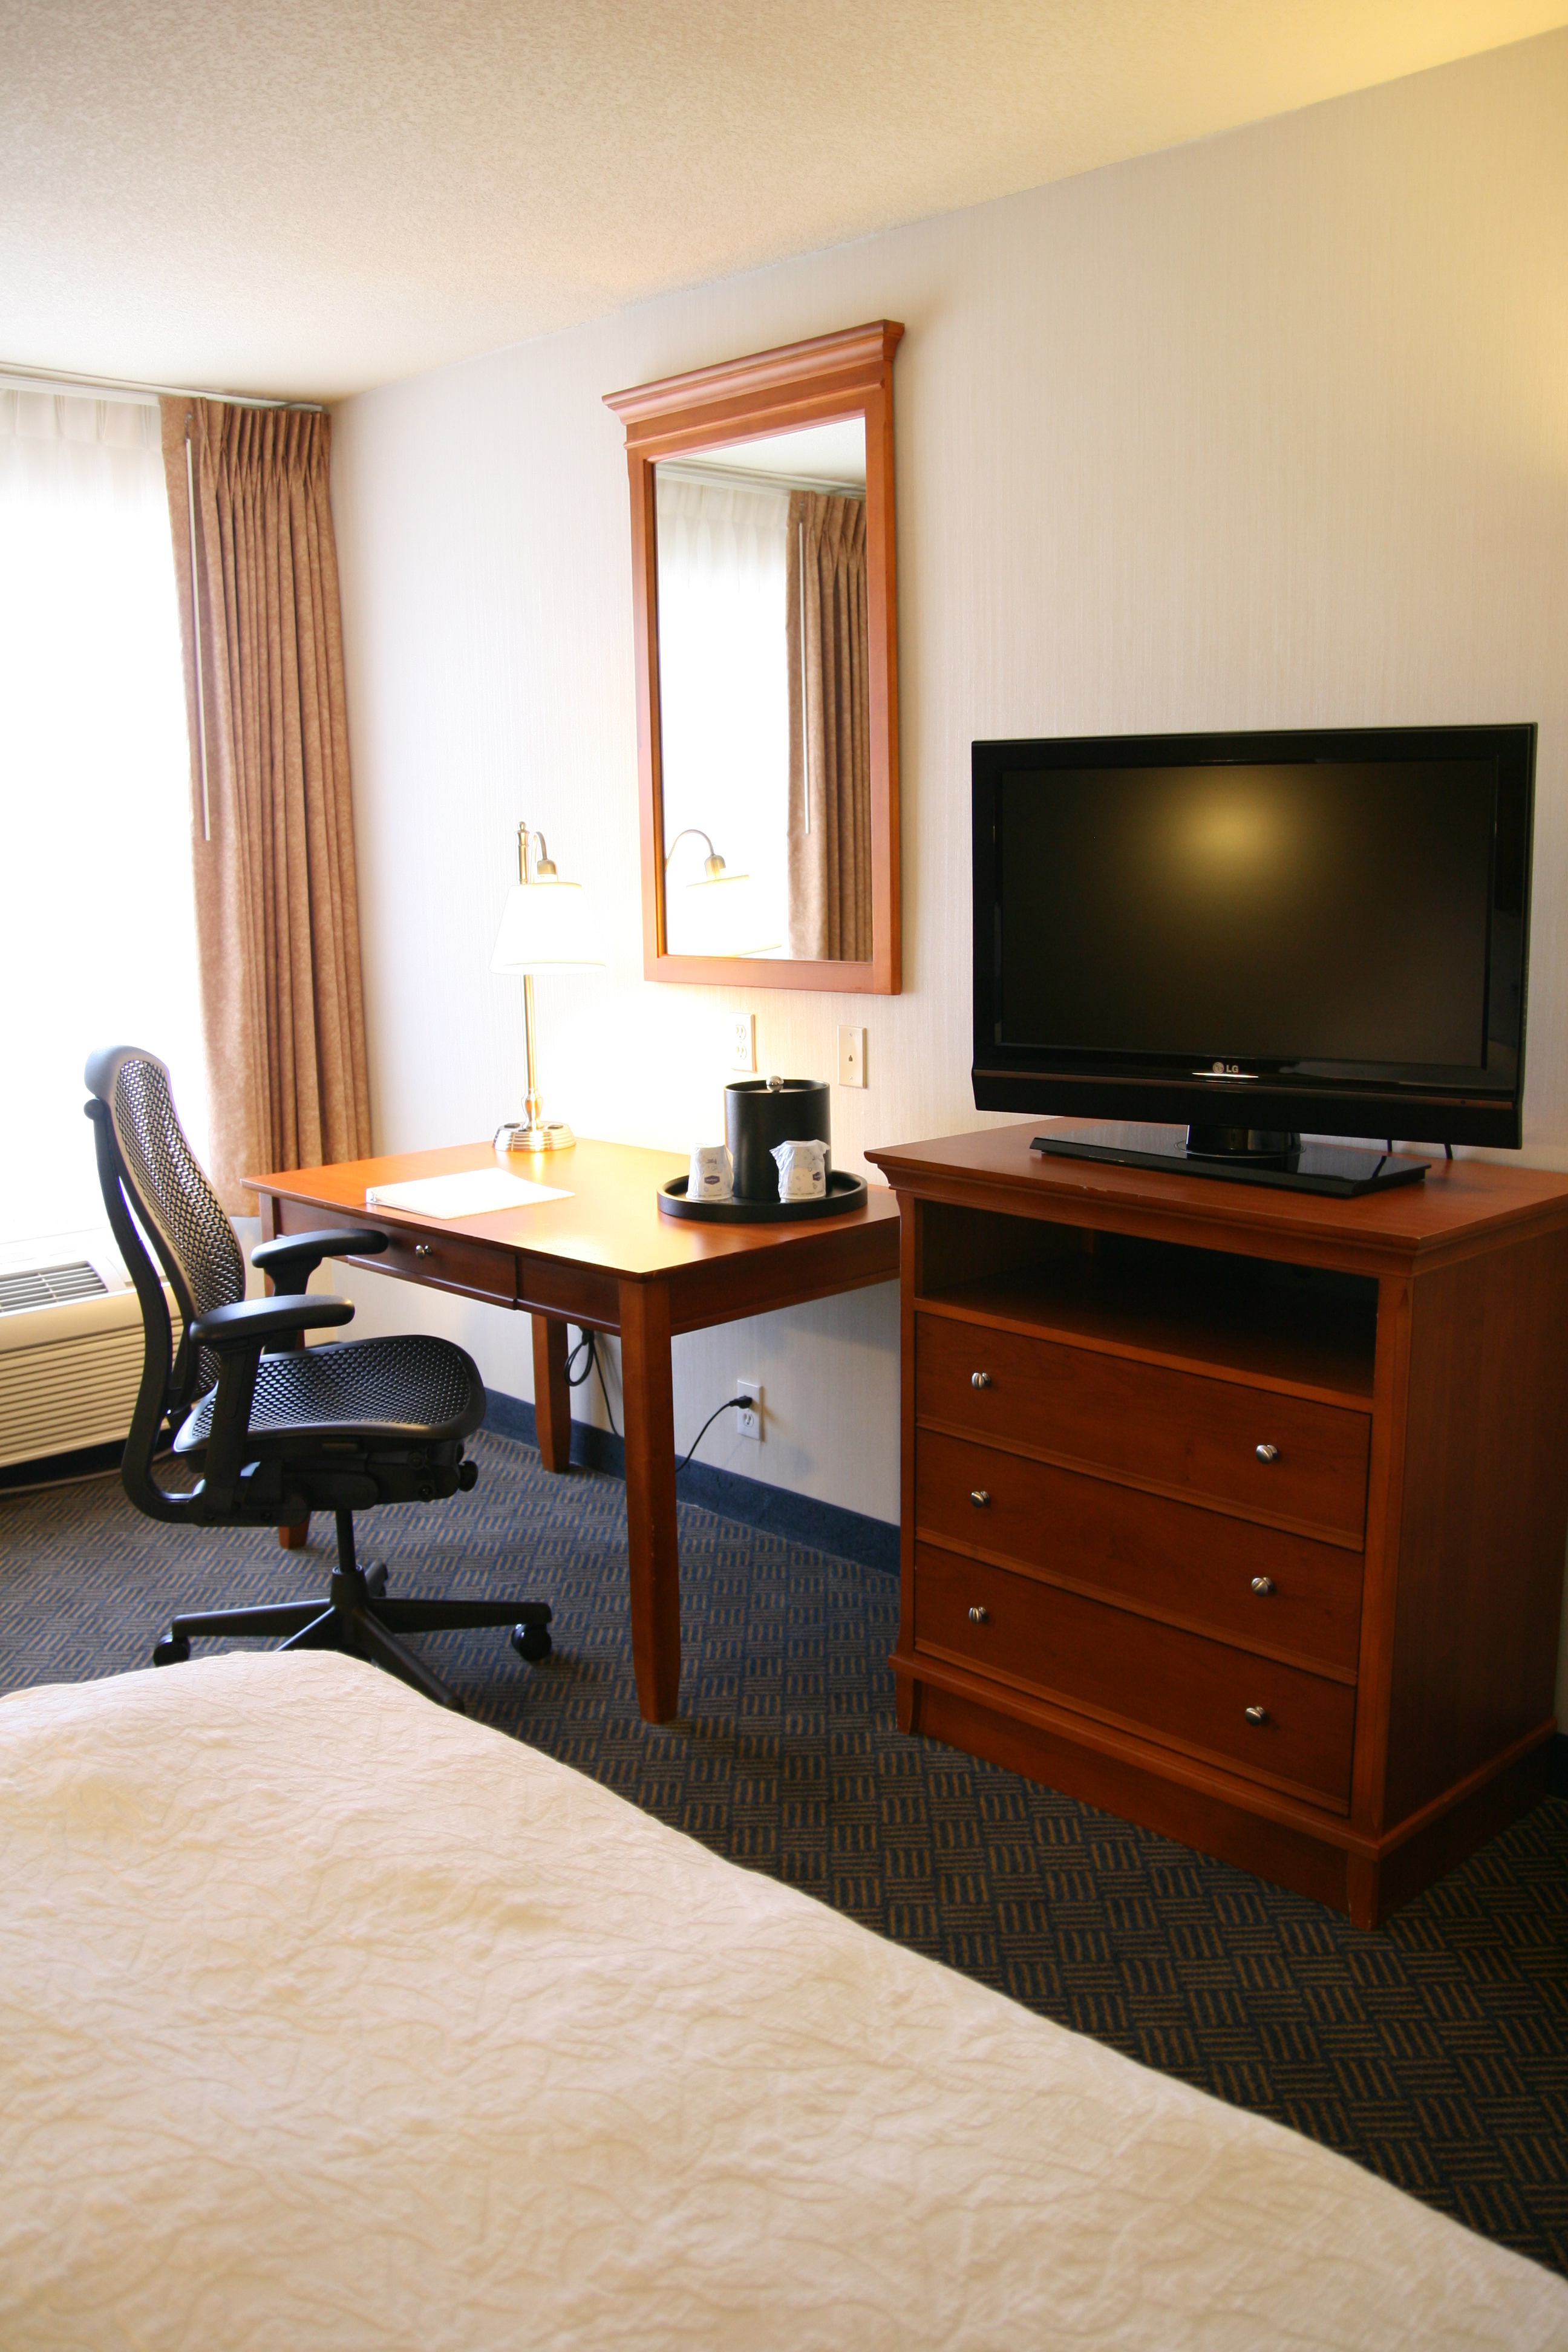 Executive Desk and 32" LCD HDTV